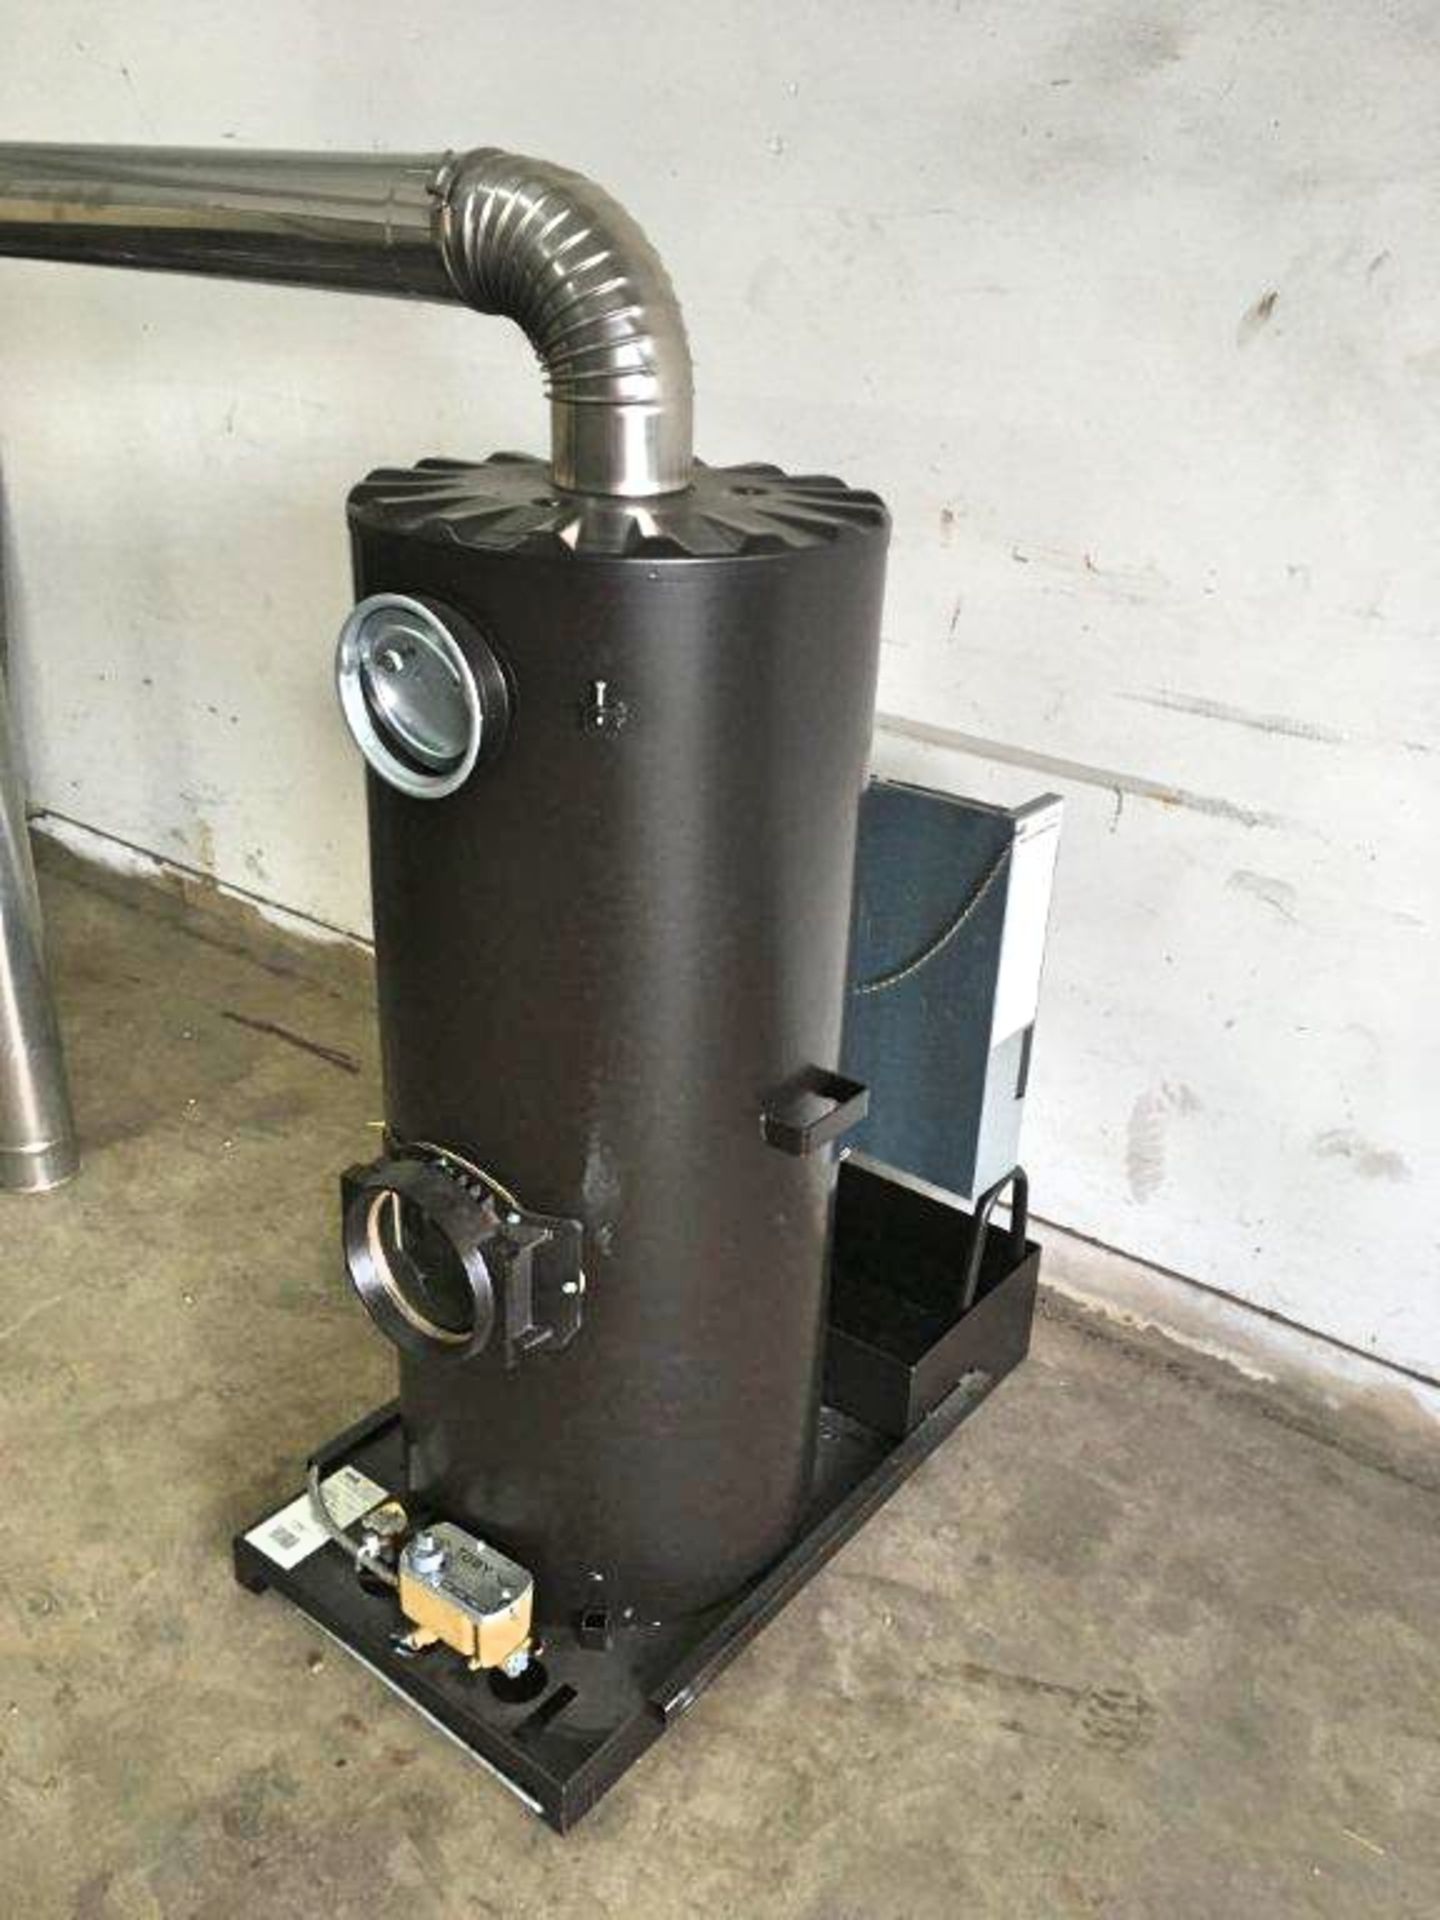 Deville 11 kw multi fuel heater New & unused  ** Installed photographs for illustration purposes